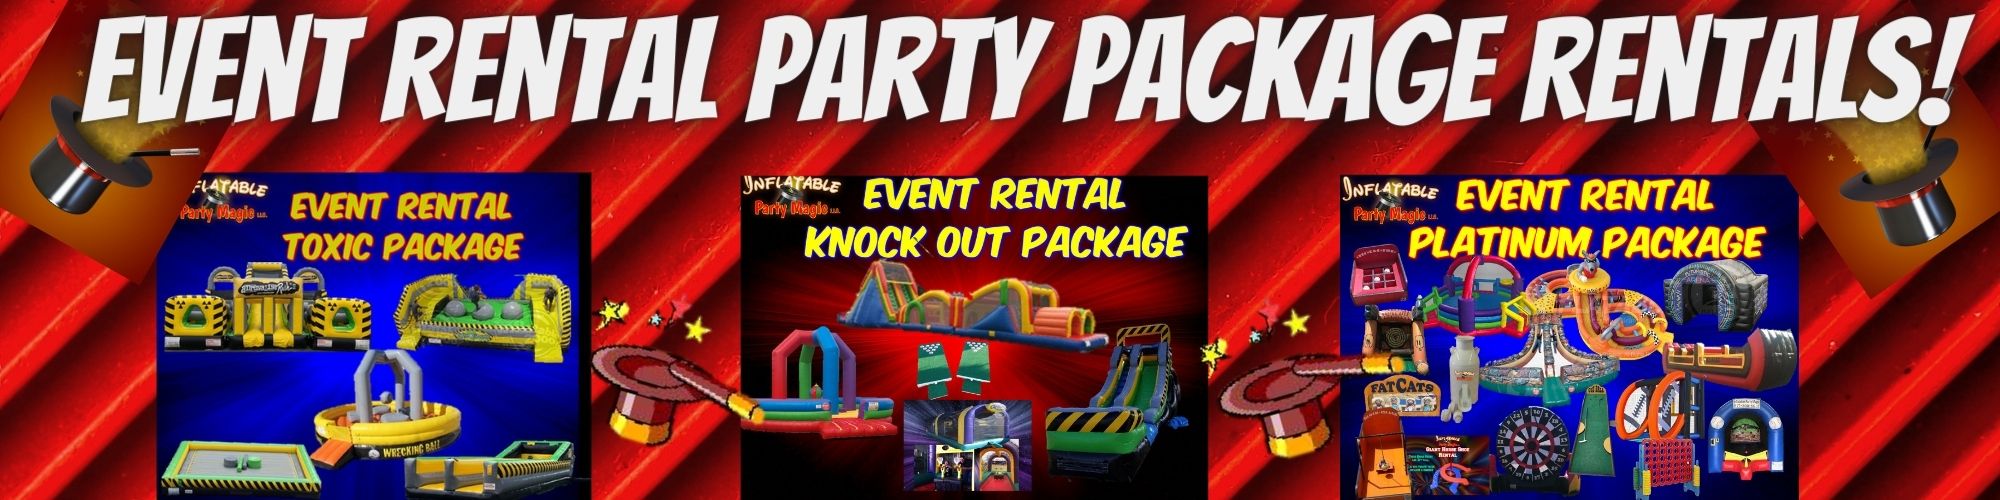 Event Rental Party Package Rentals near me